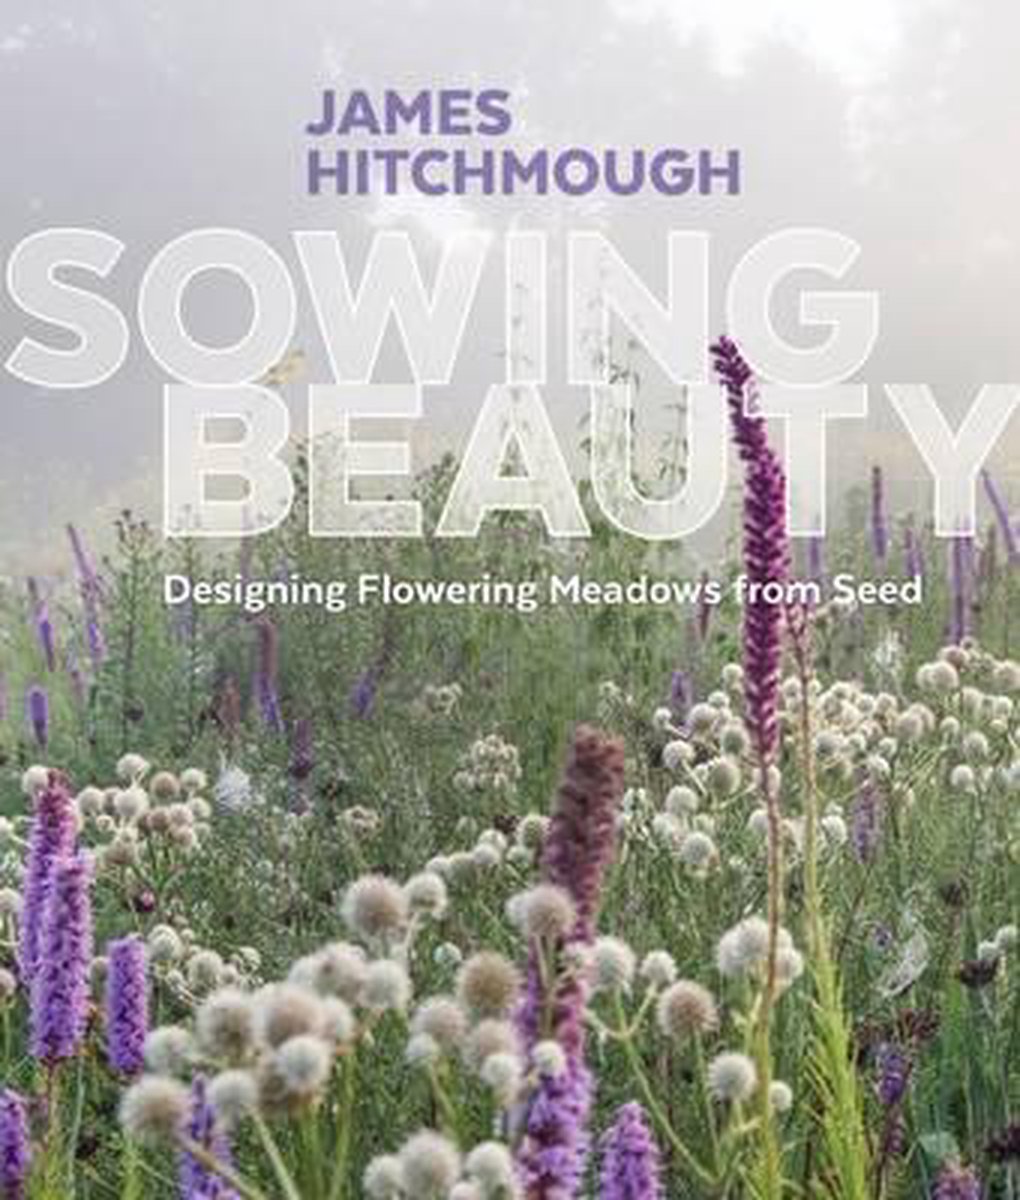 Sowing Beauty - James Hitchmough